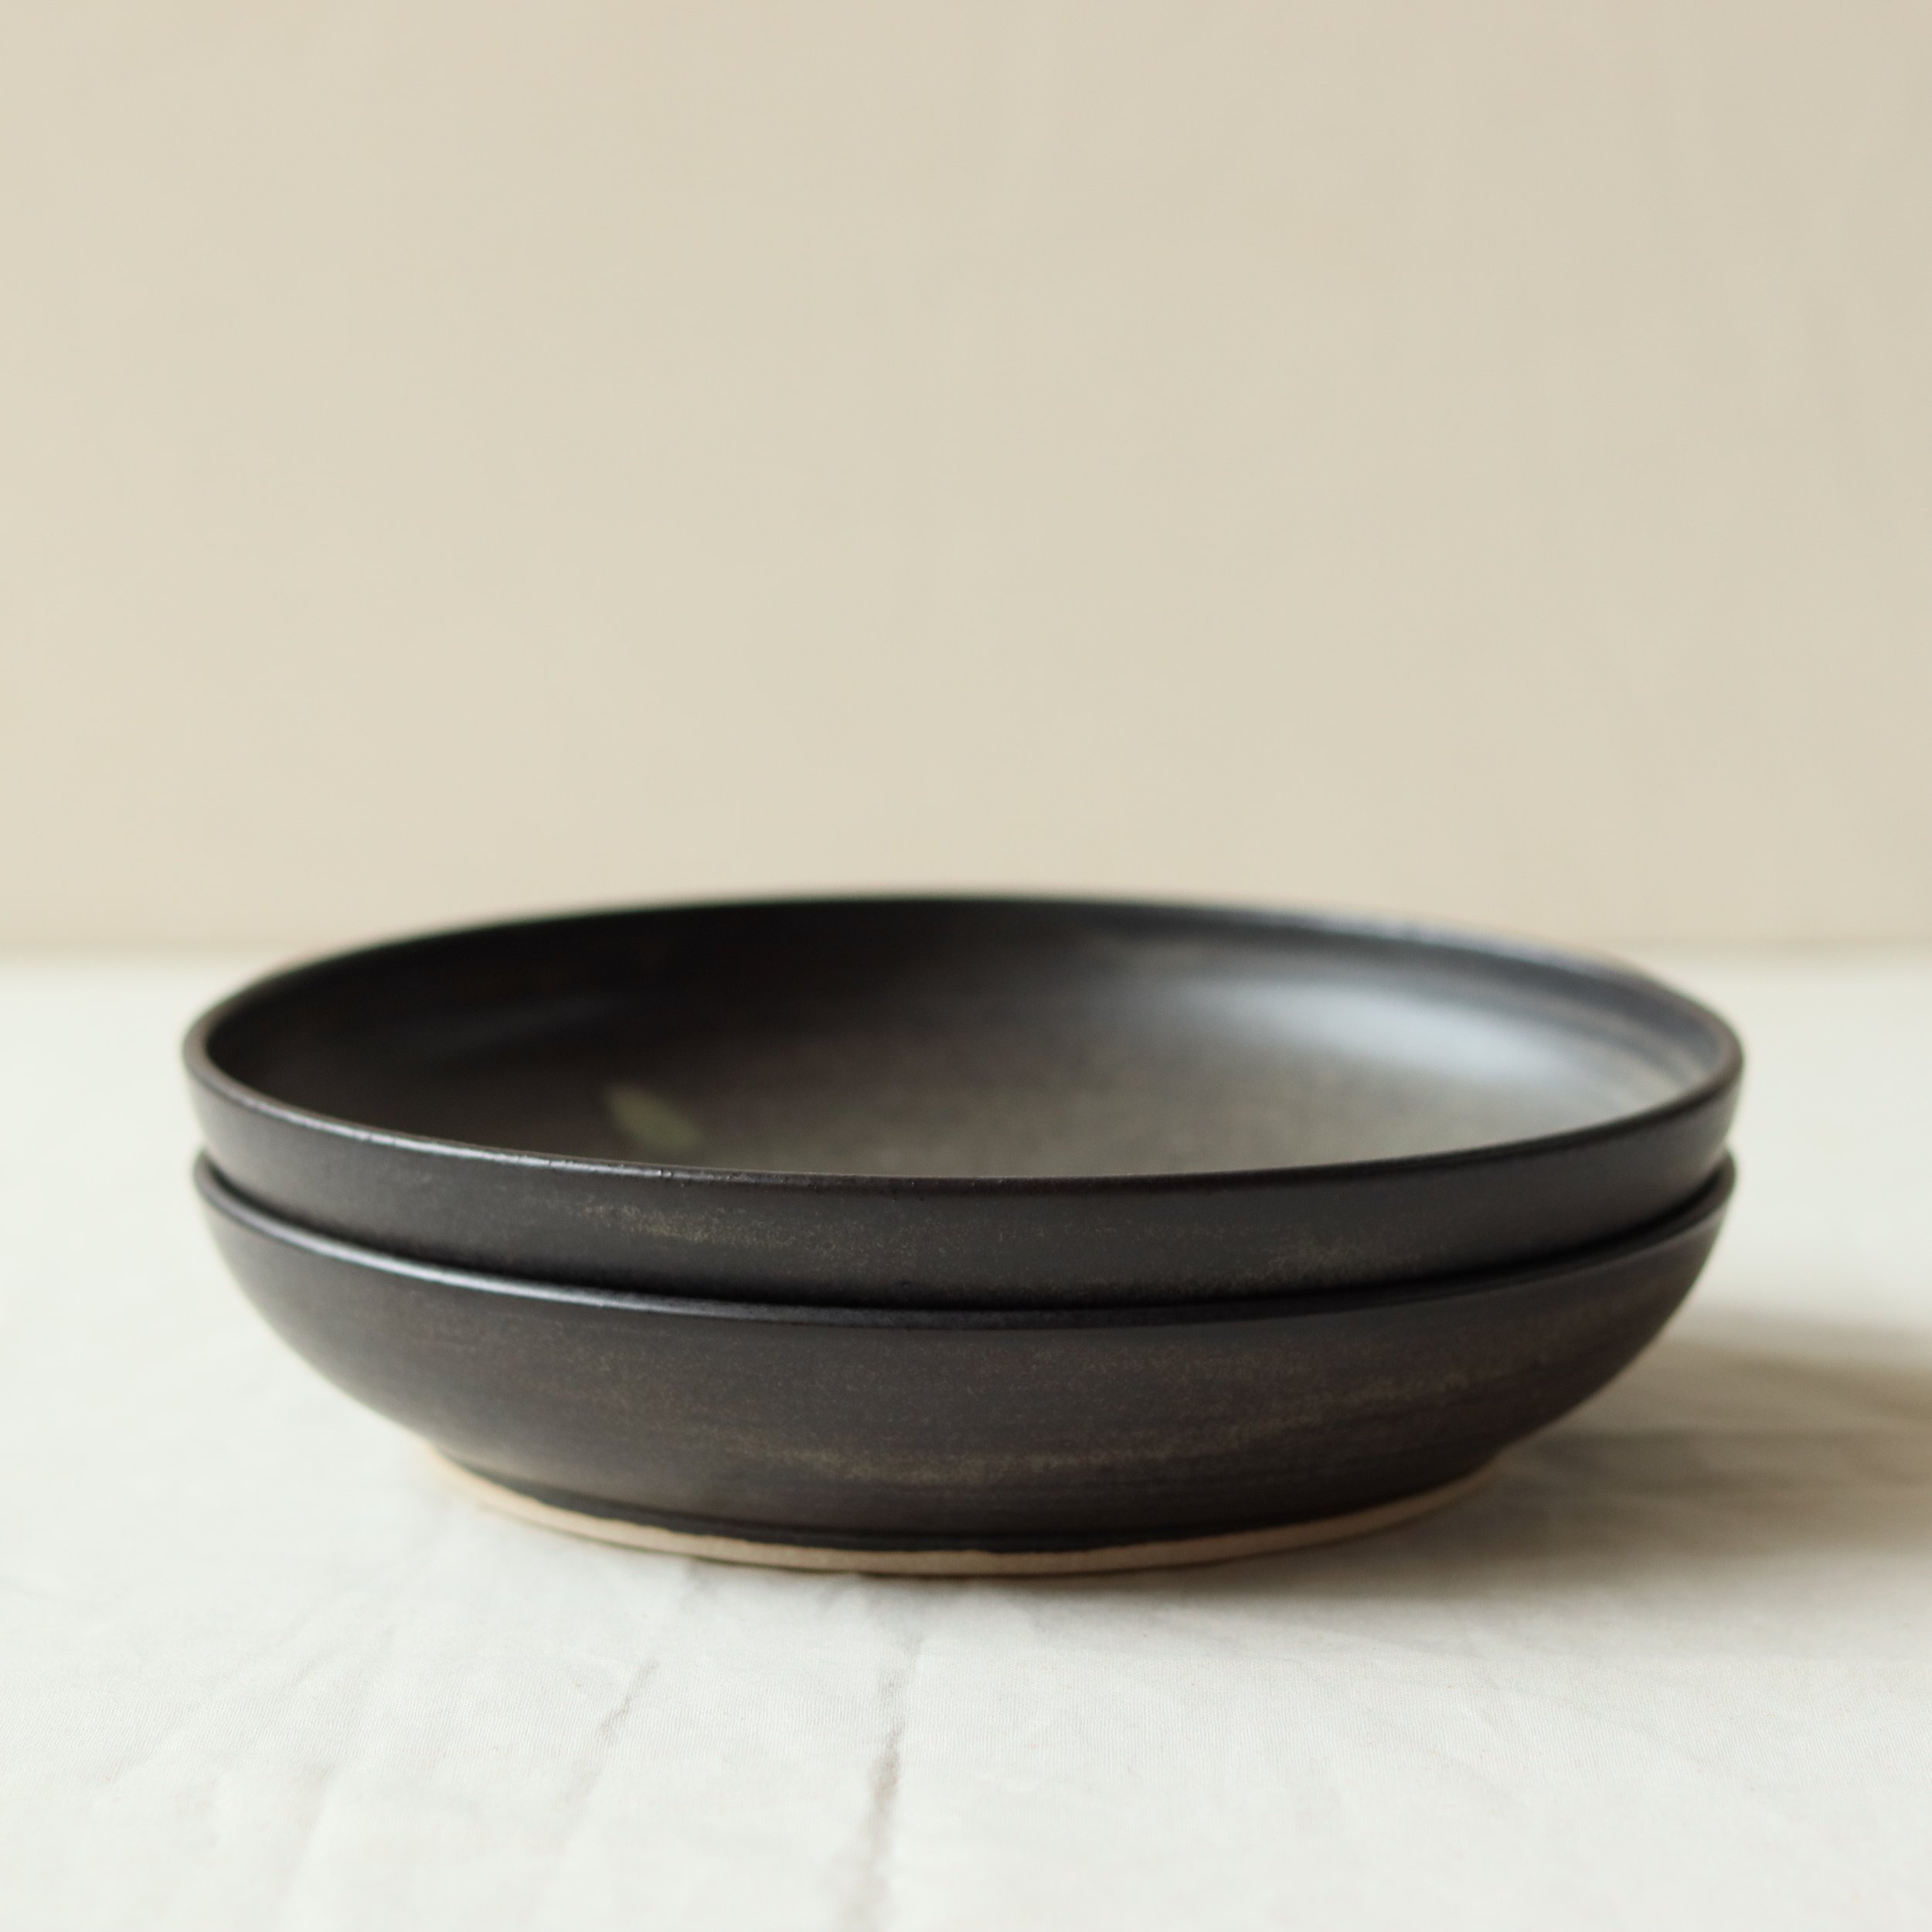 Dinner Bowl in Charcoal, Pale Stoneware  -01.jpg